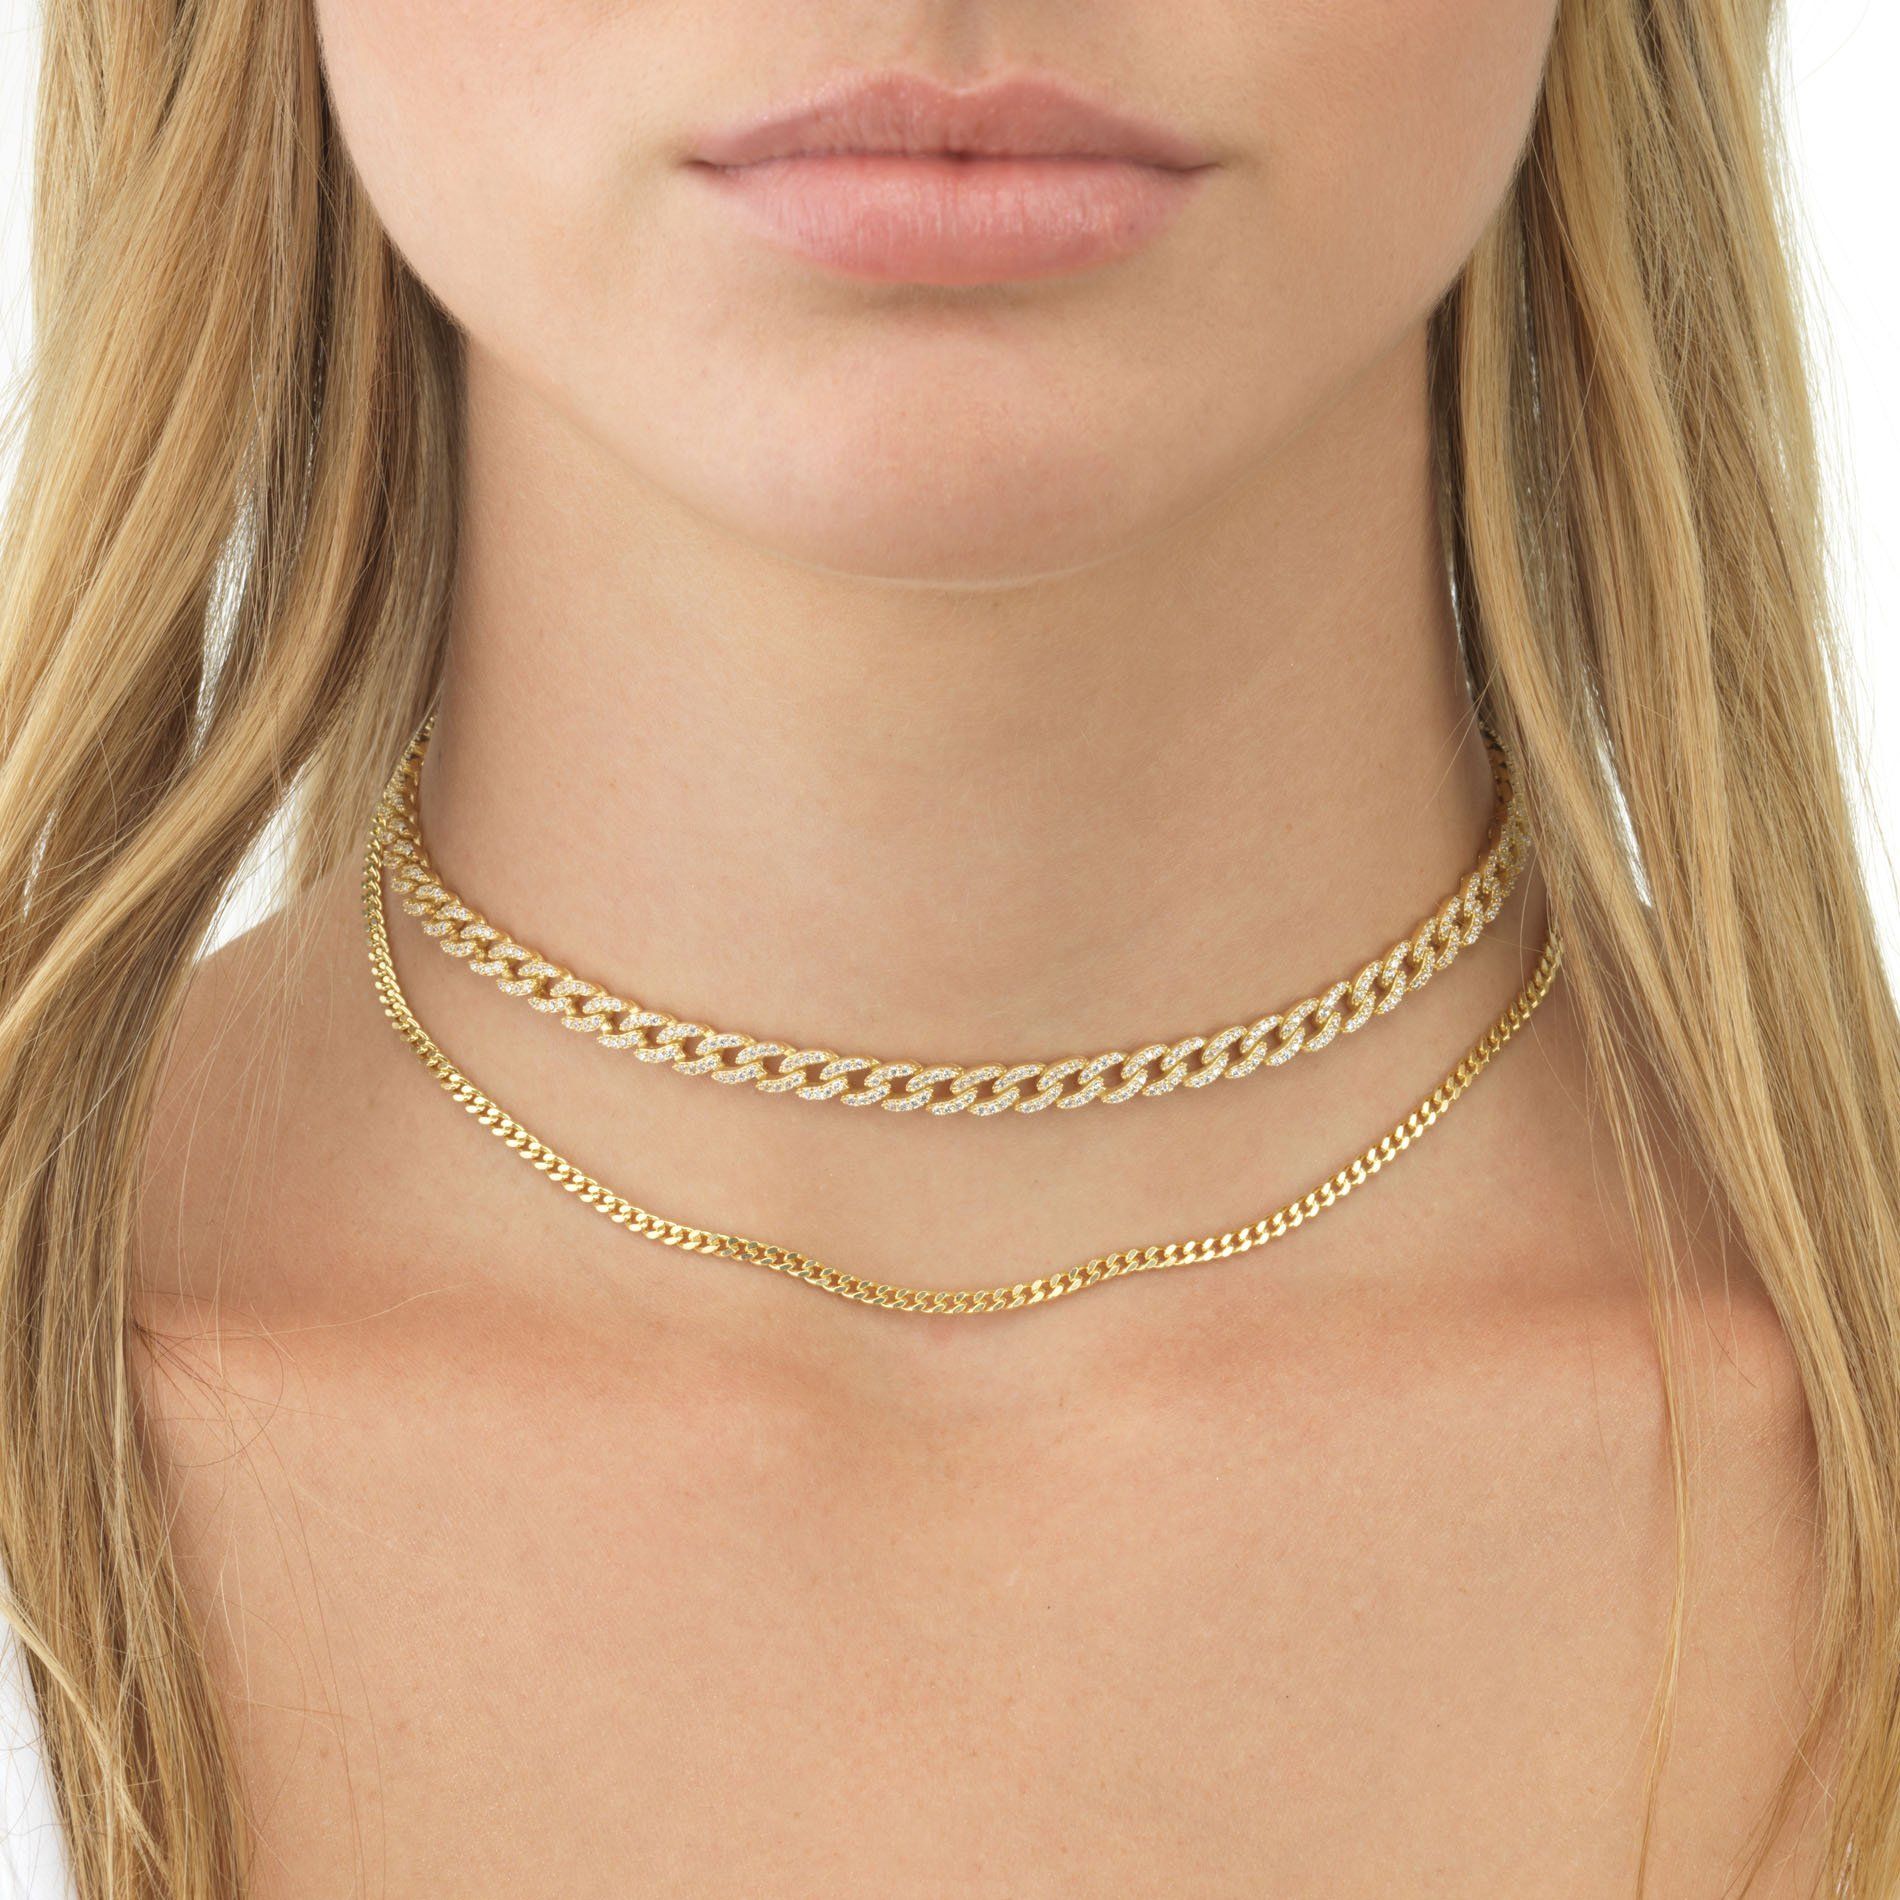 Acedre Chunky Choker Necklace Gold Cuban Link Chain Double O Link Necklaces Punk Hip-hop Jewelry for Women and Girls